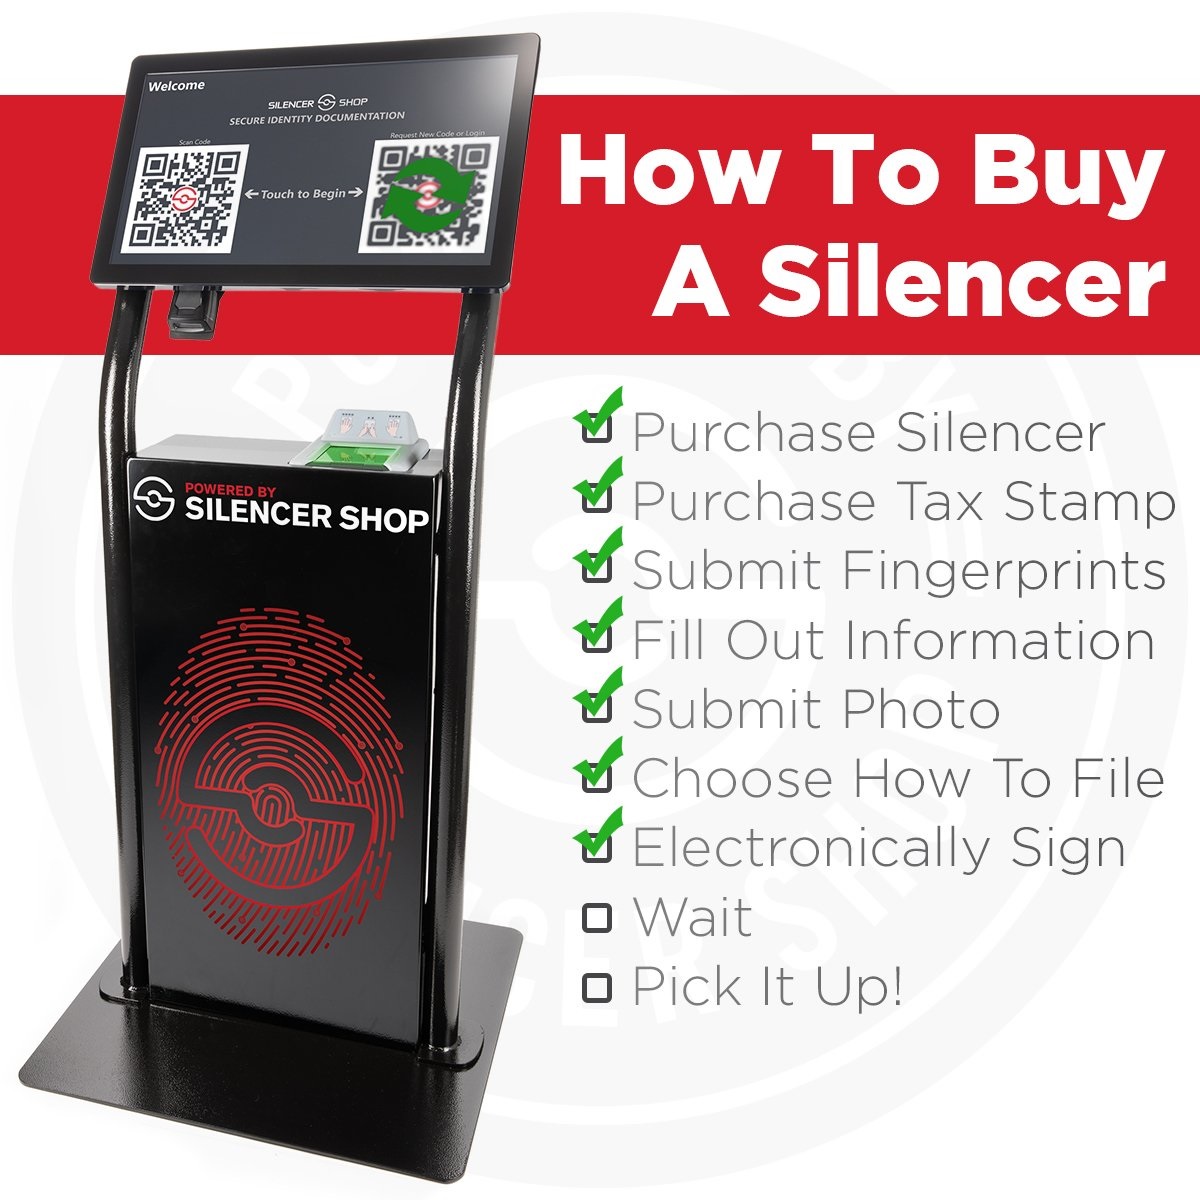 https://www.silencershop.com/how-to-buy-a-silencer